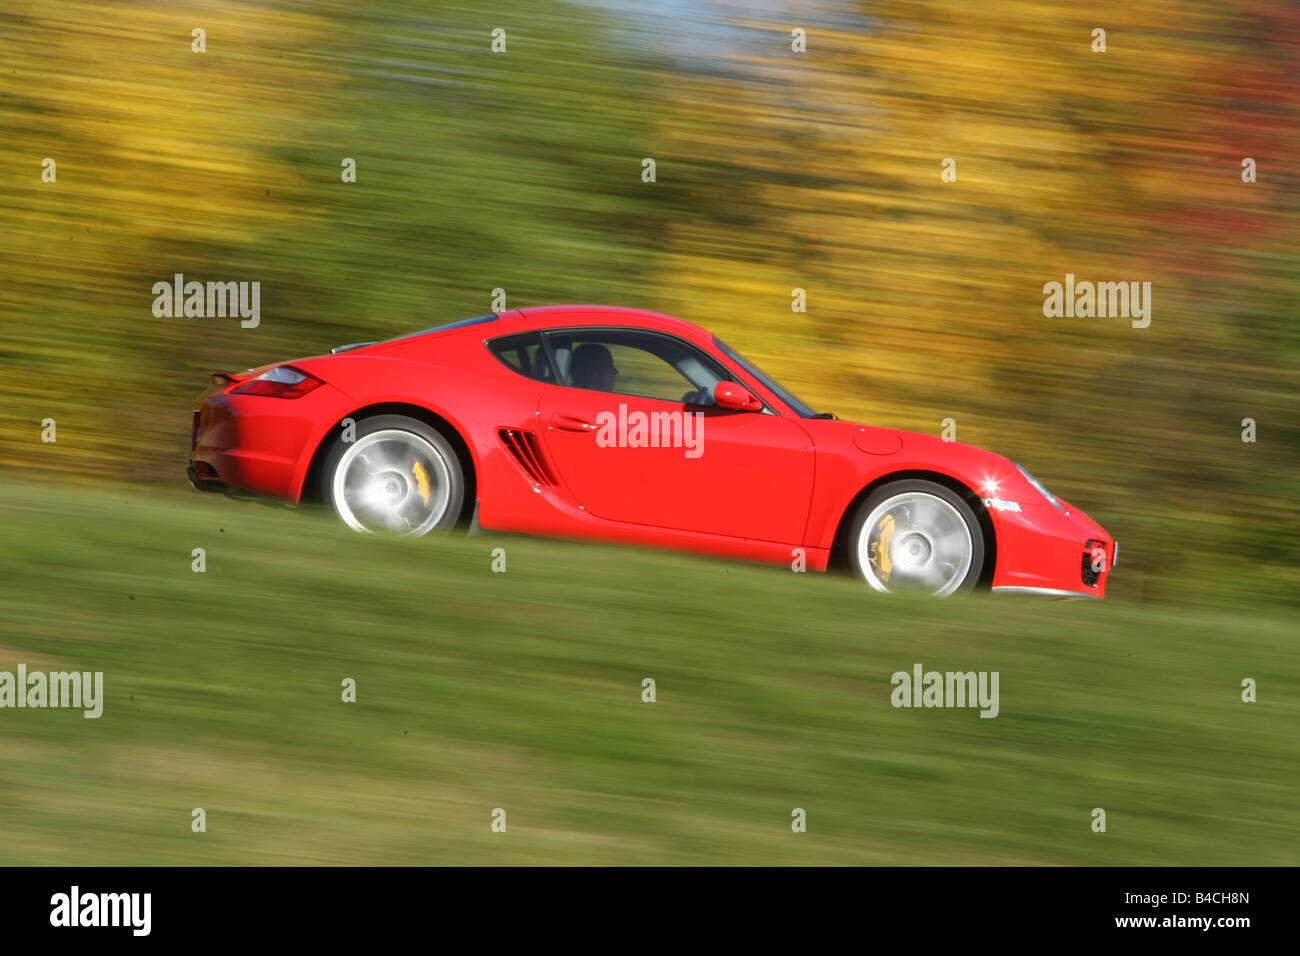 Porsche Cayman S, roadster, model year 2005-, red, driving, side view, country road, landsapprox.e, Autumn Stock Photo